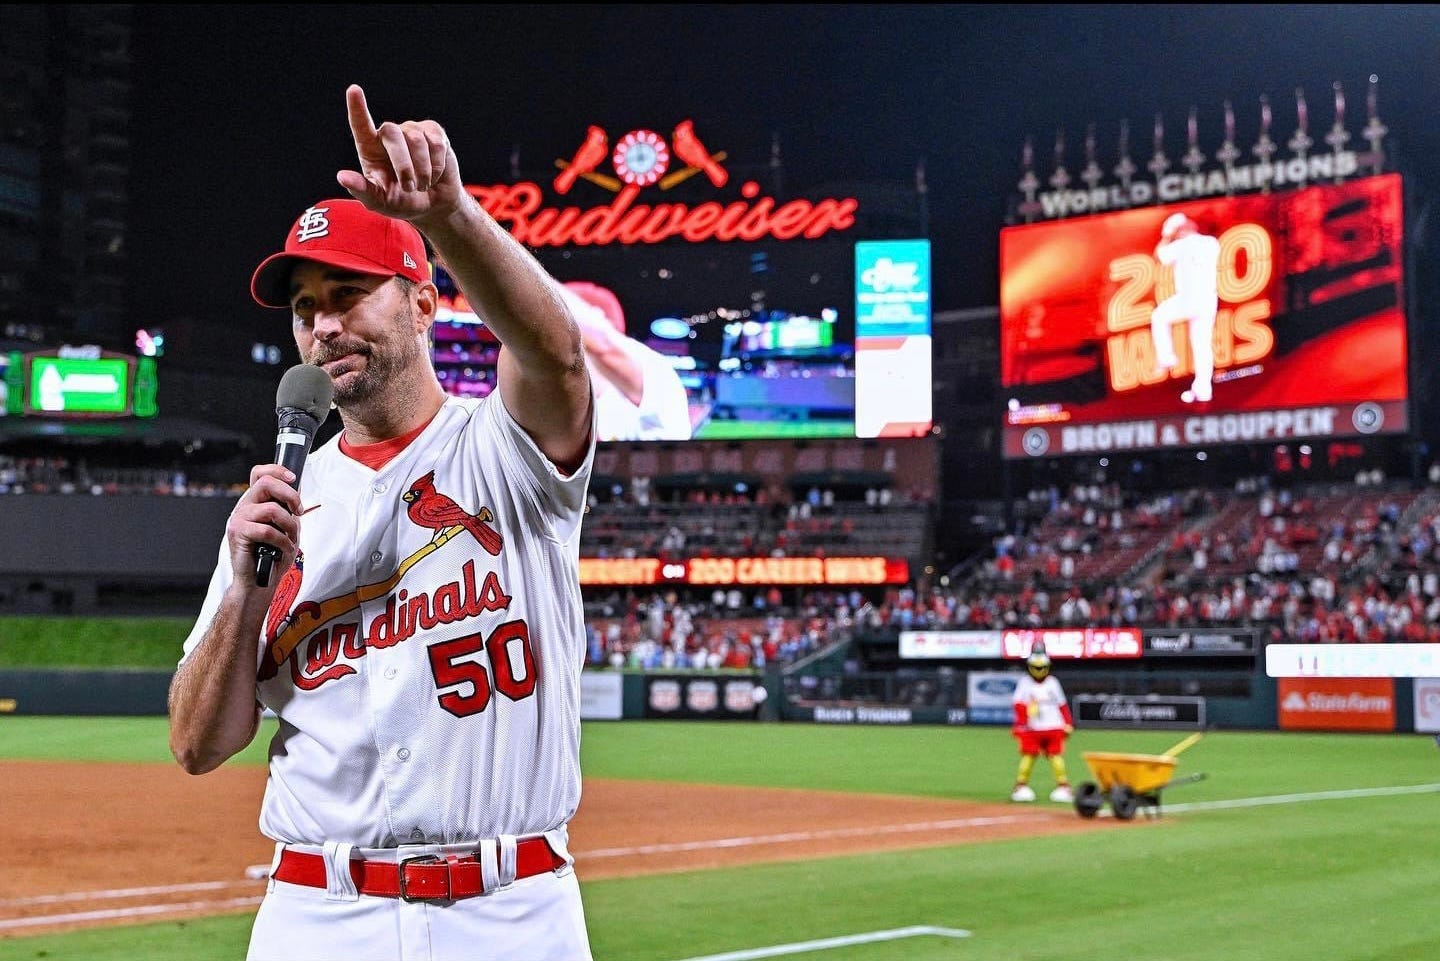 A few words about Adam Wainwright, 200 wins, and ageless wonders